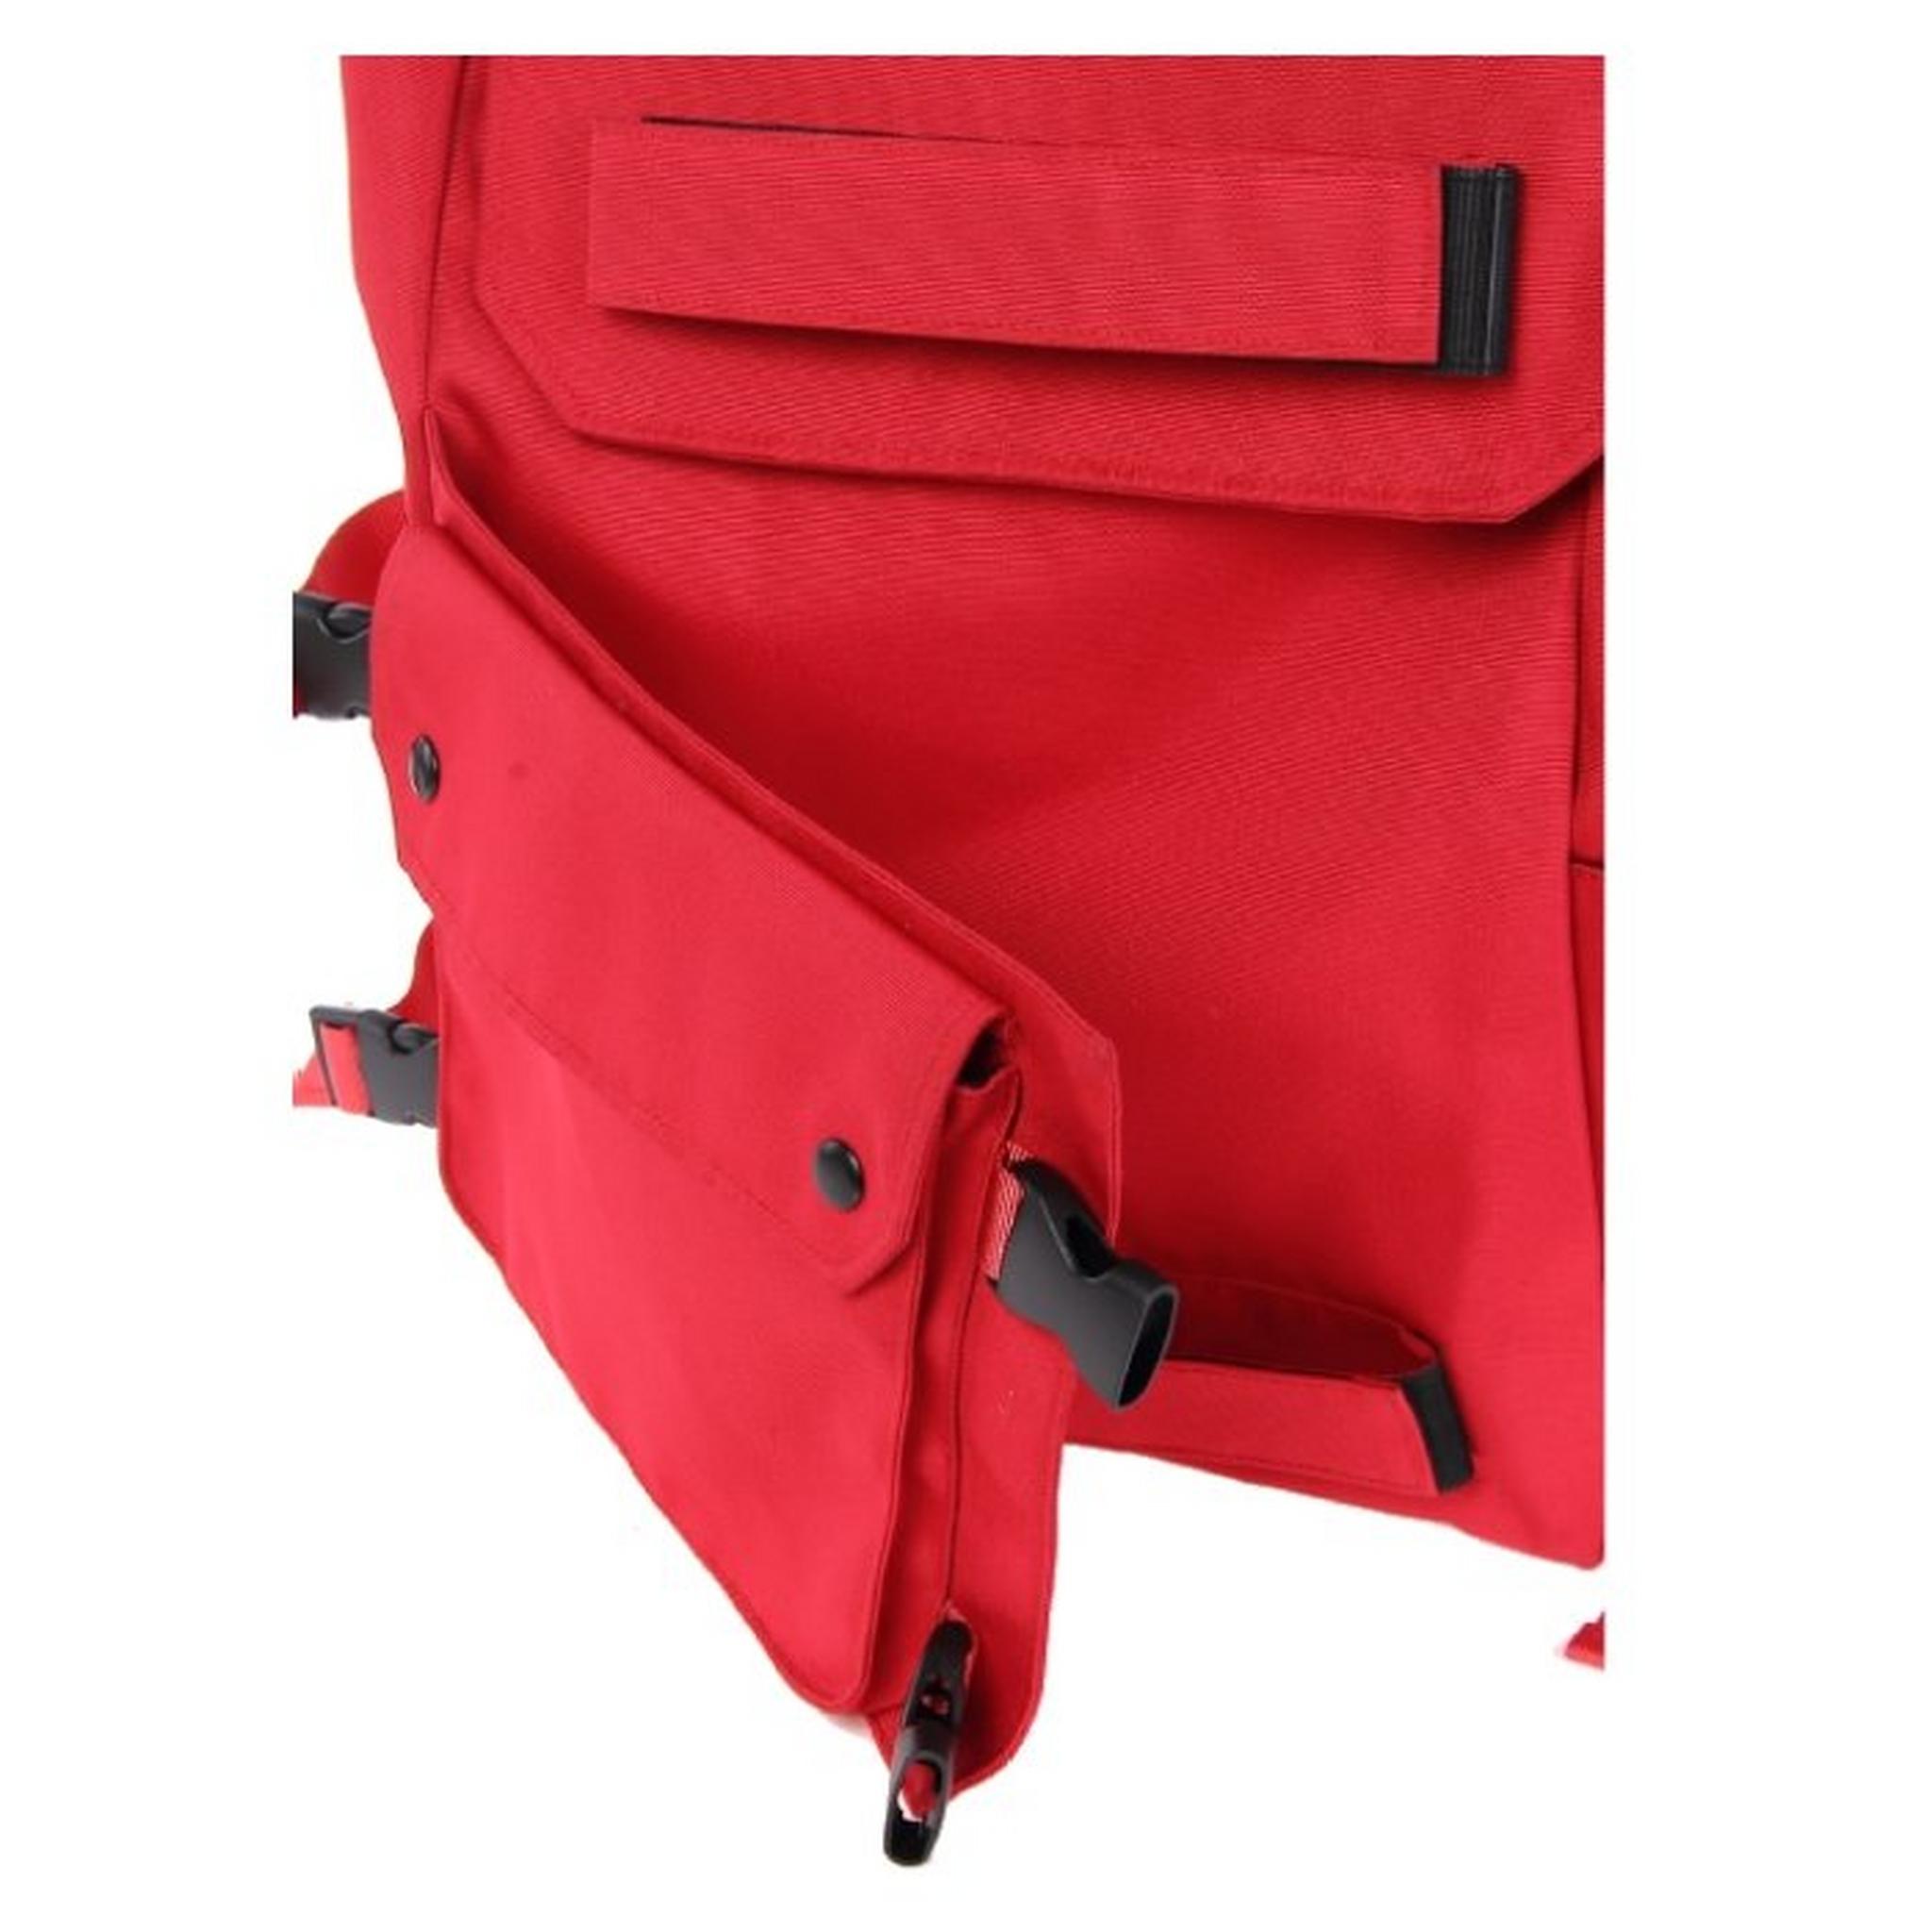 EQ 4 Straps 15.6" Backpack - Red